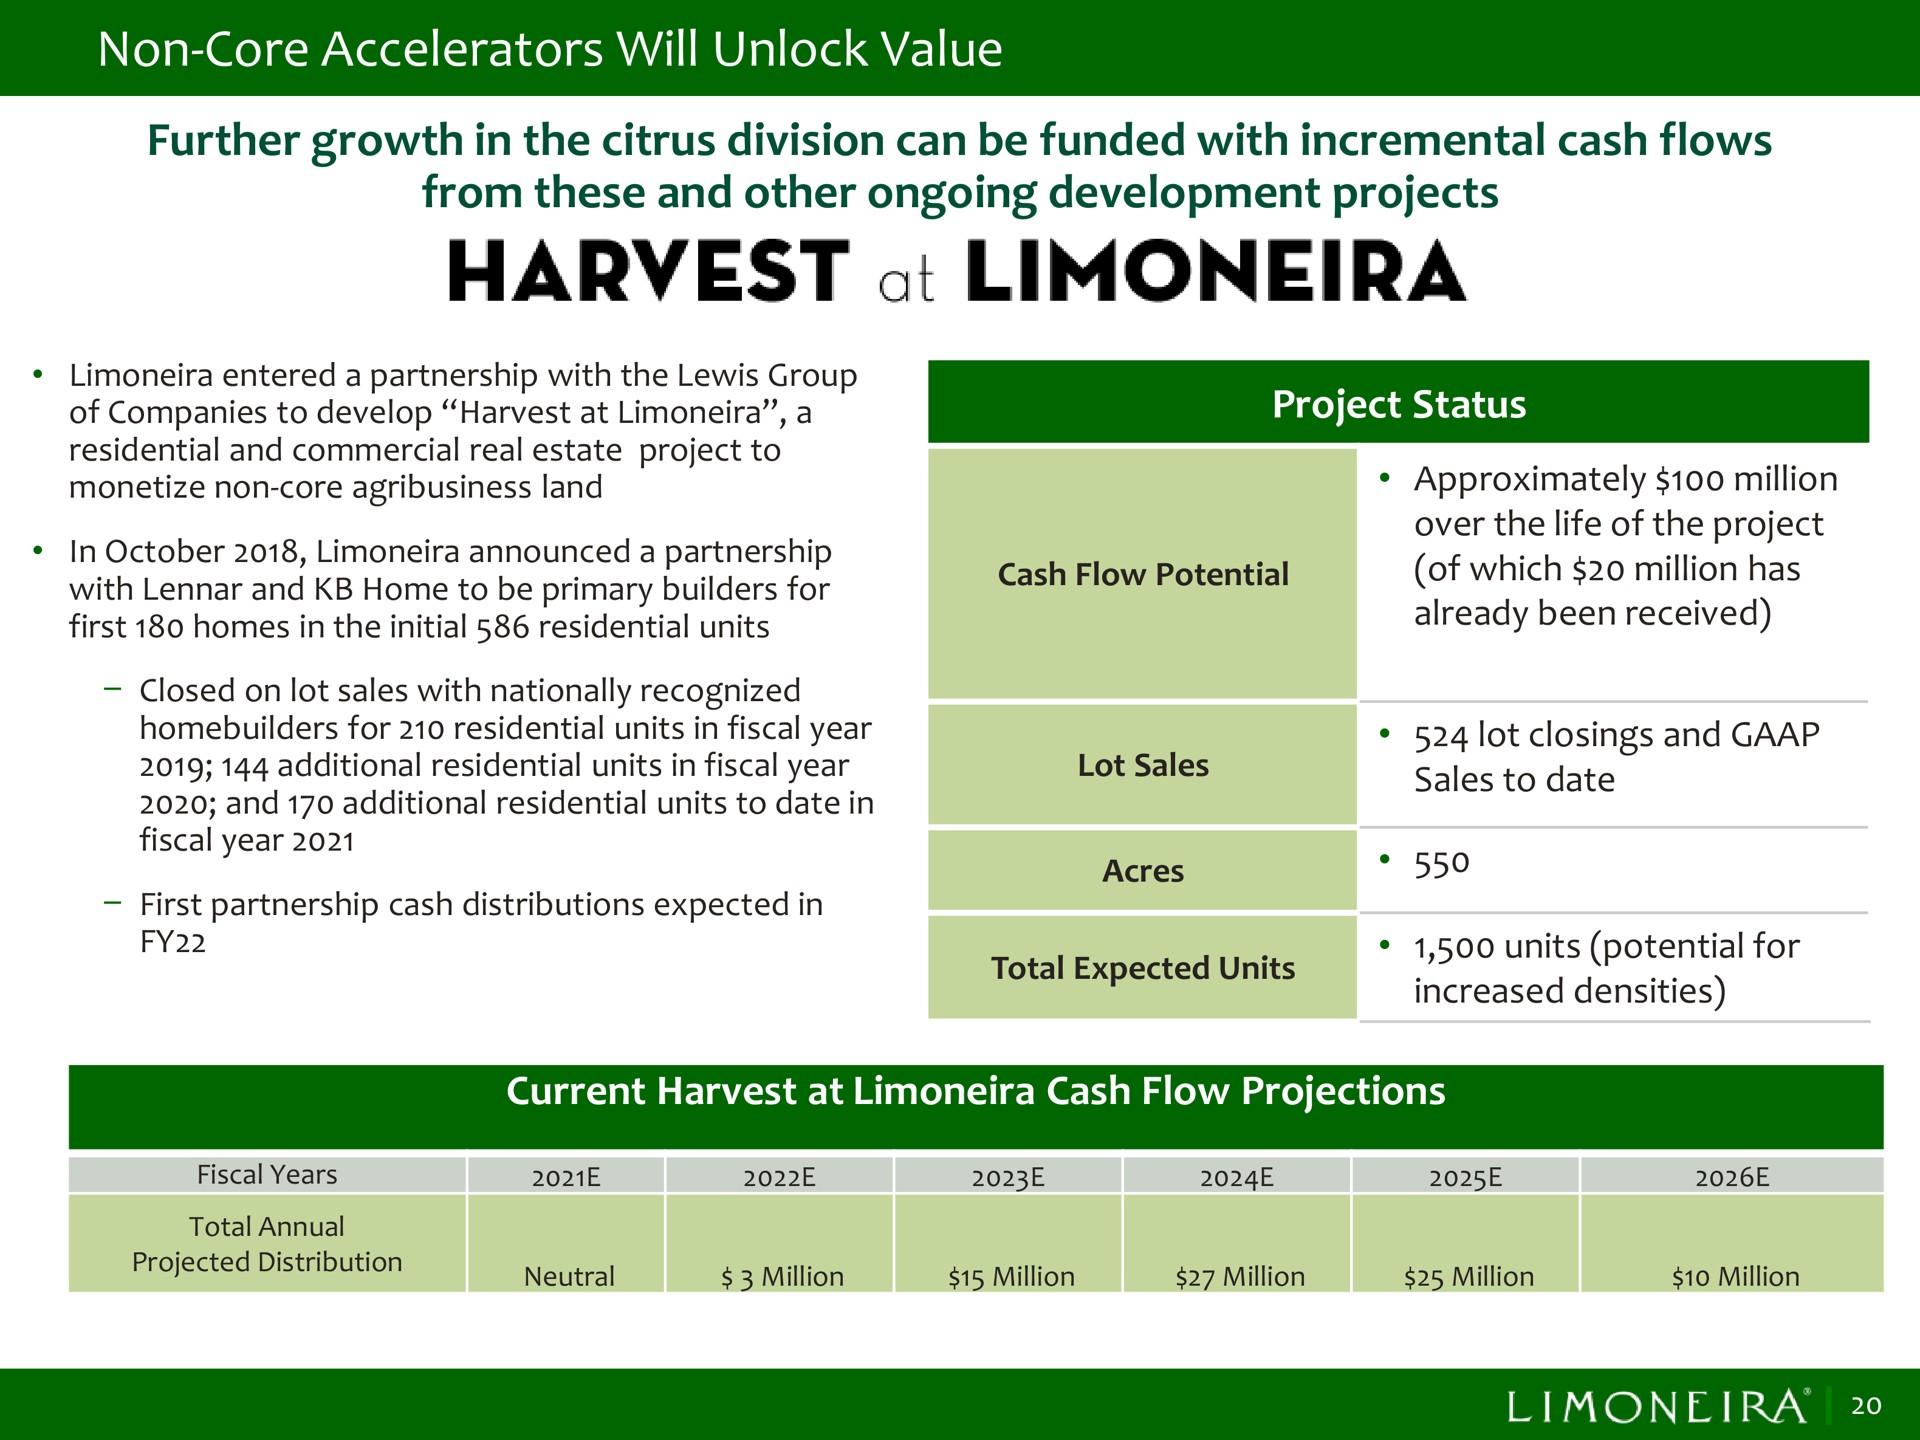 non core accelerators will unlock value further growth in the citrus division can be funded with incremental cash flows from these and other ongoing development projects harvest it | Limoneira